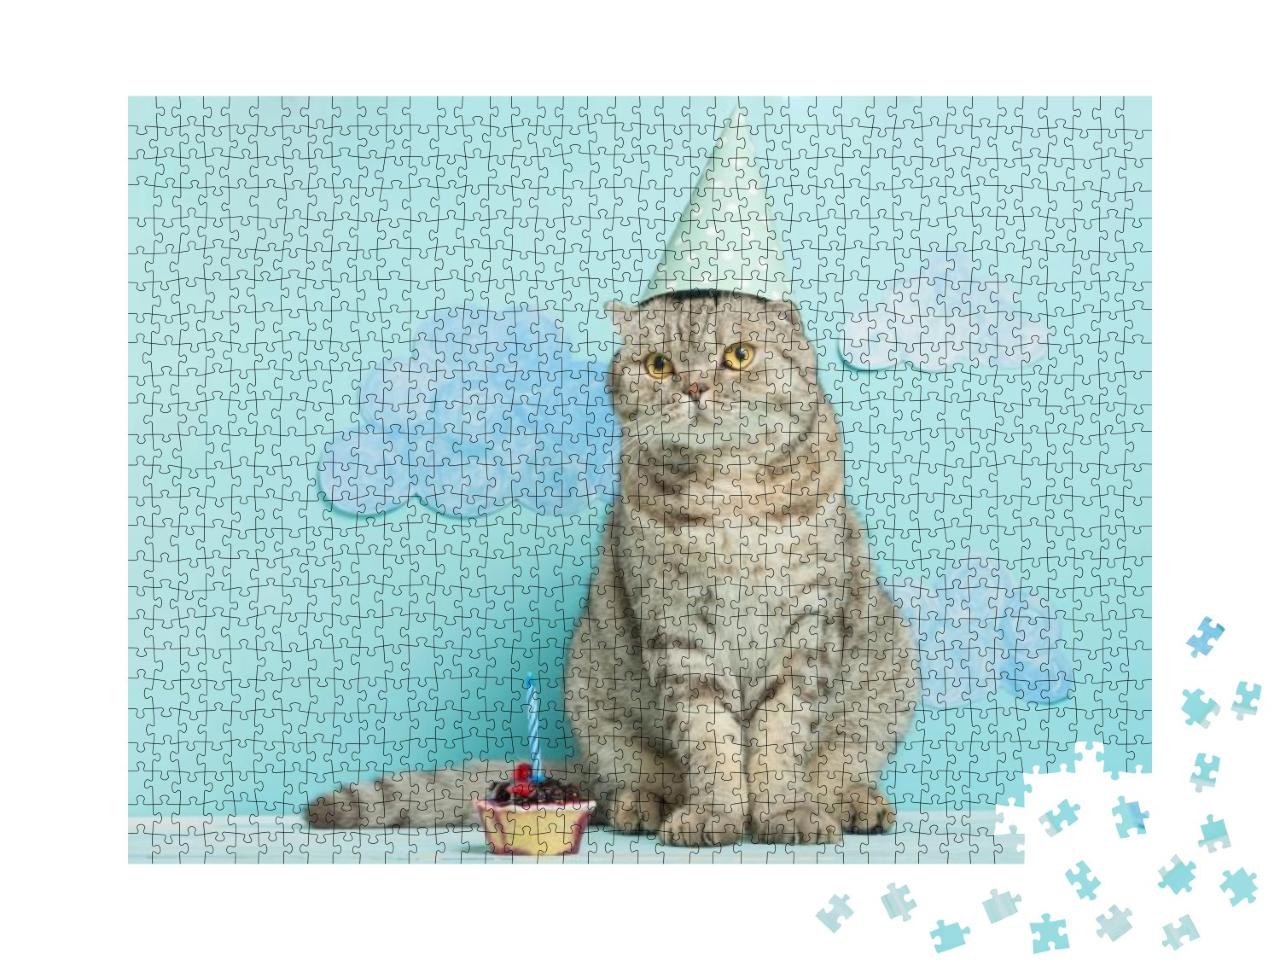 Birthday Greetings from a Cat... Jigsaw Puzzle with 1000 pieces